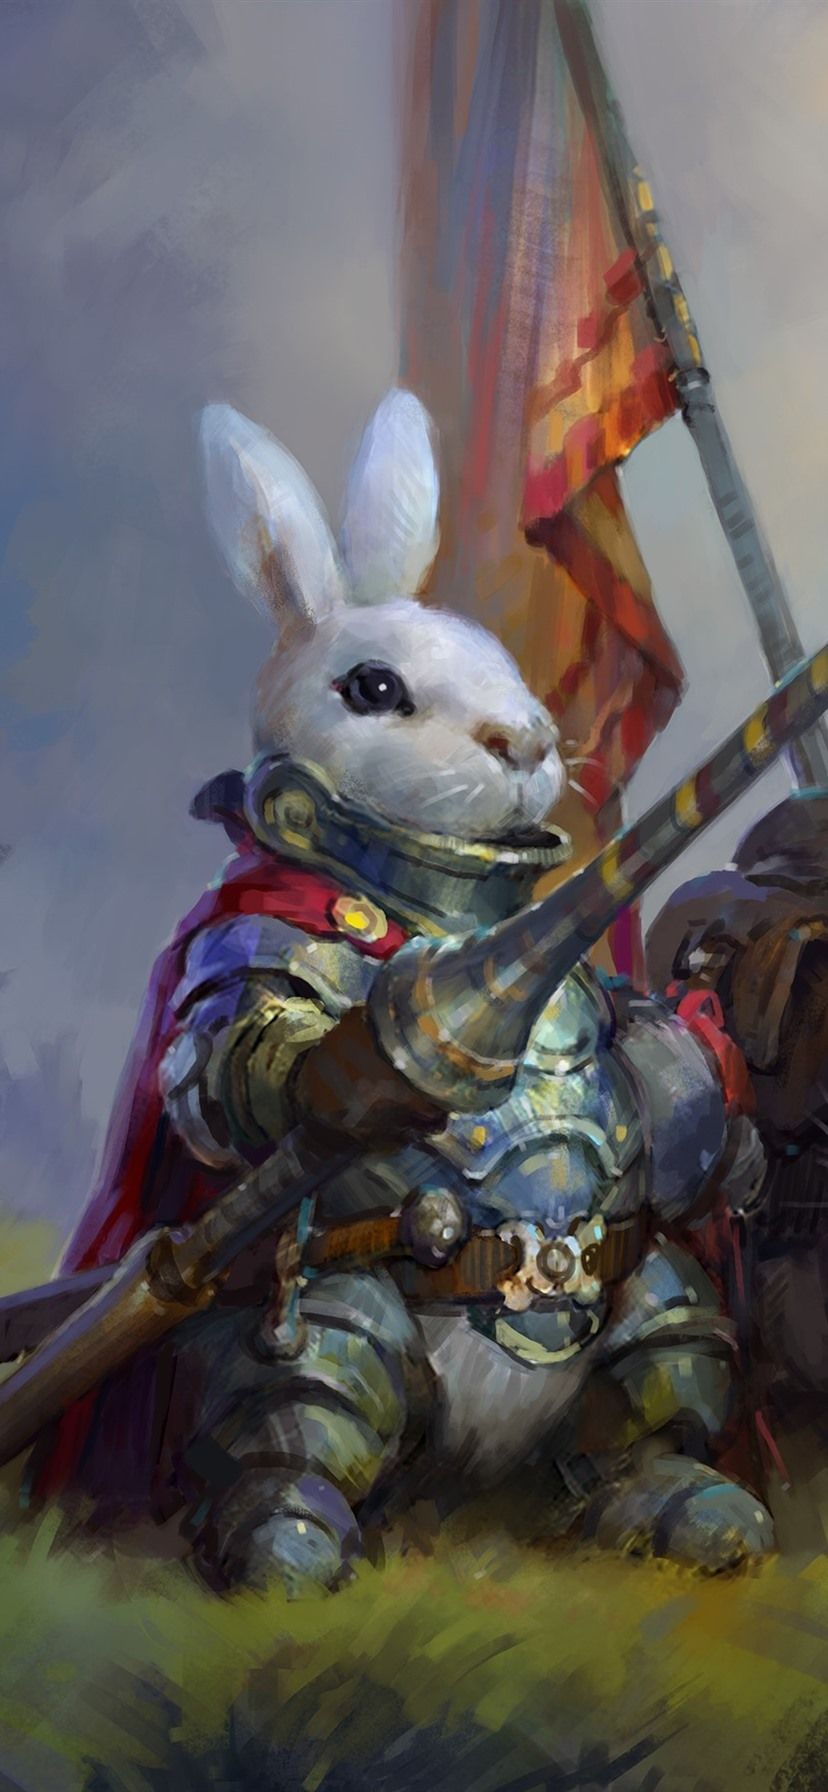 Rabbit Warrior, Art Painting 828x1792 IPhone 11 XR Wallpaper, Background, Picture, Image